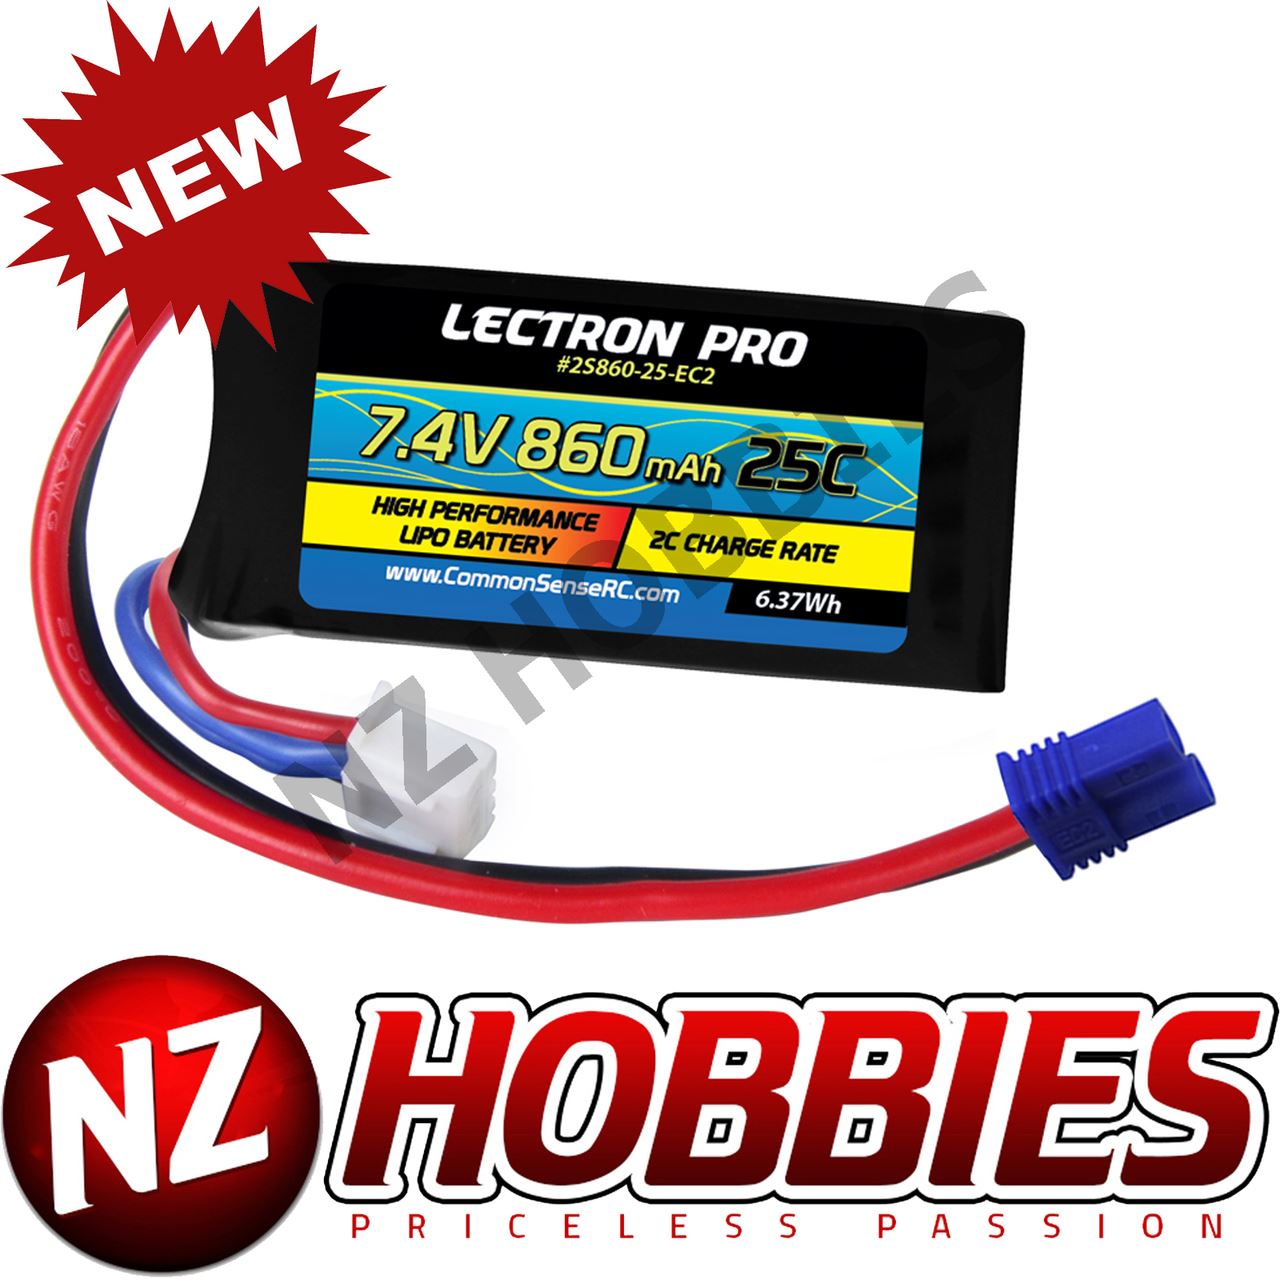 Lectron Pro 7.4v 2000mah 25c Lipo Battery With Xt60 Connector CSRC Adapter for sale online